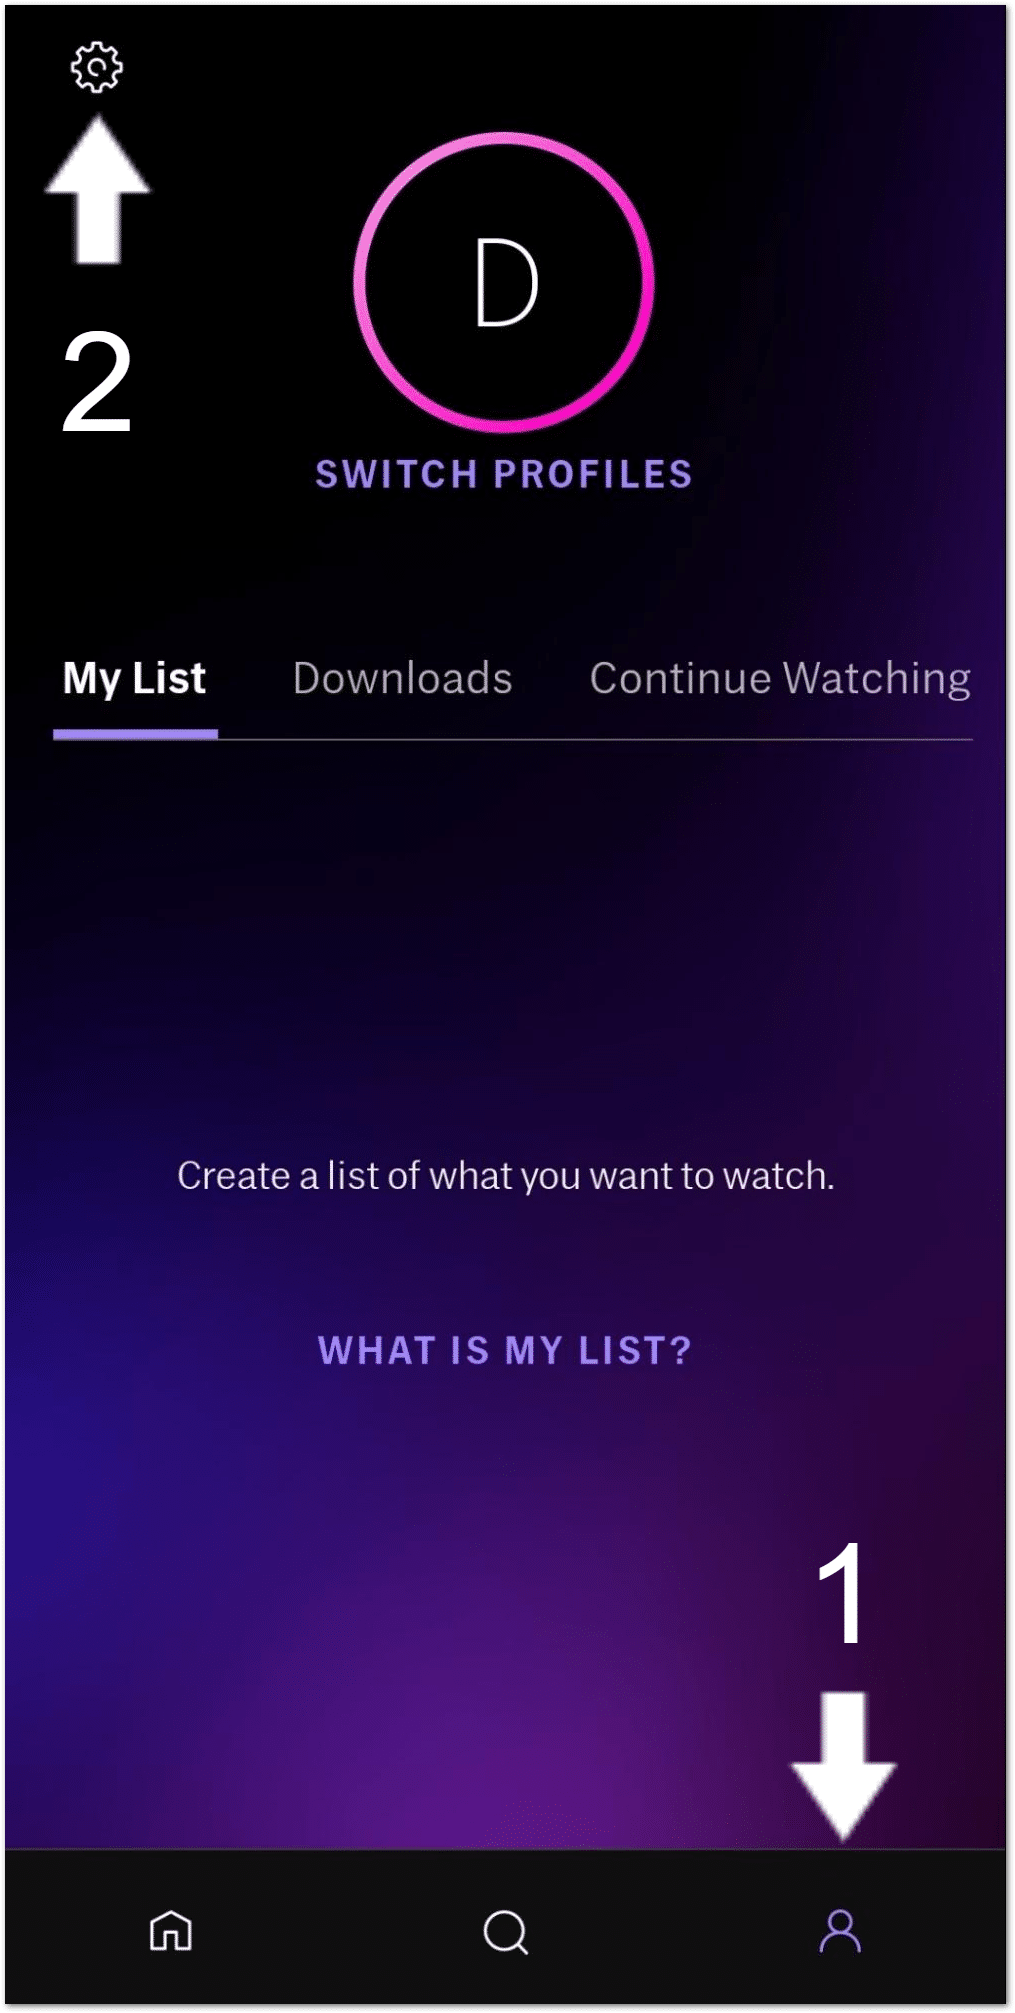 access settings menu on HBO Max mobile app to sign out and fix HBO Max subtitles or closed captions not working, showing or loading